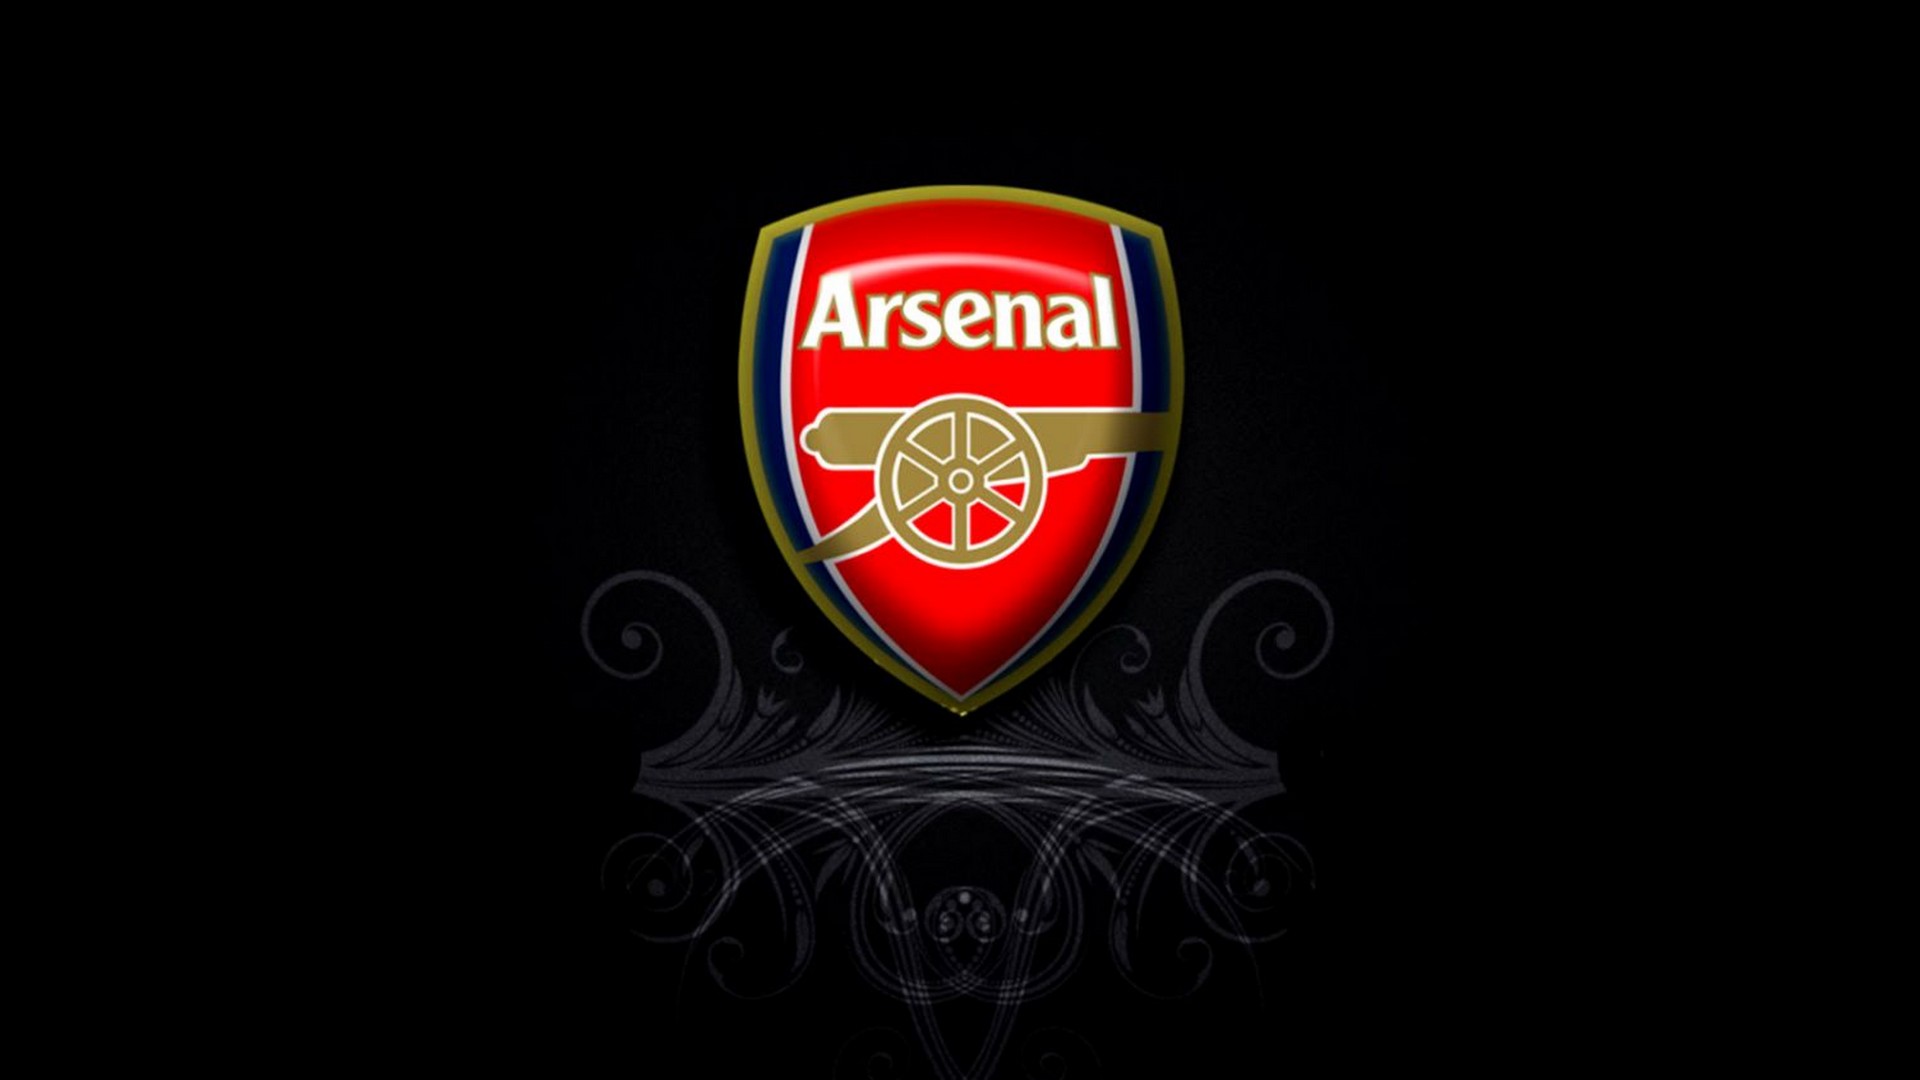 Windows Wallpaper Arsenal With high-resolution 1920X1080 pixel. You can use this wallpaper for your Desktop Computers, Mac Screensavers, Windows Backgrounds, iPhone Wallpapers, Tablet or Android Lock screen and another Mobile device